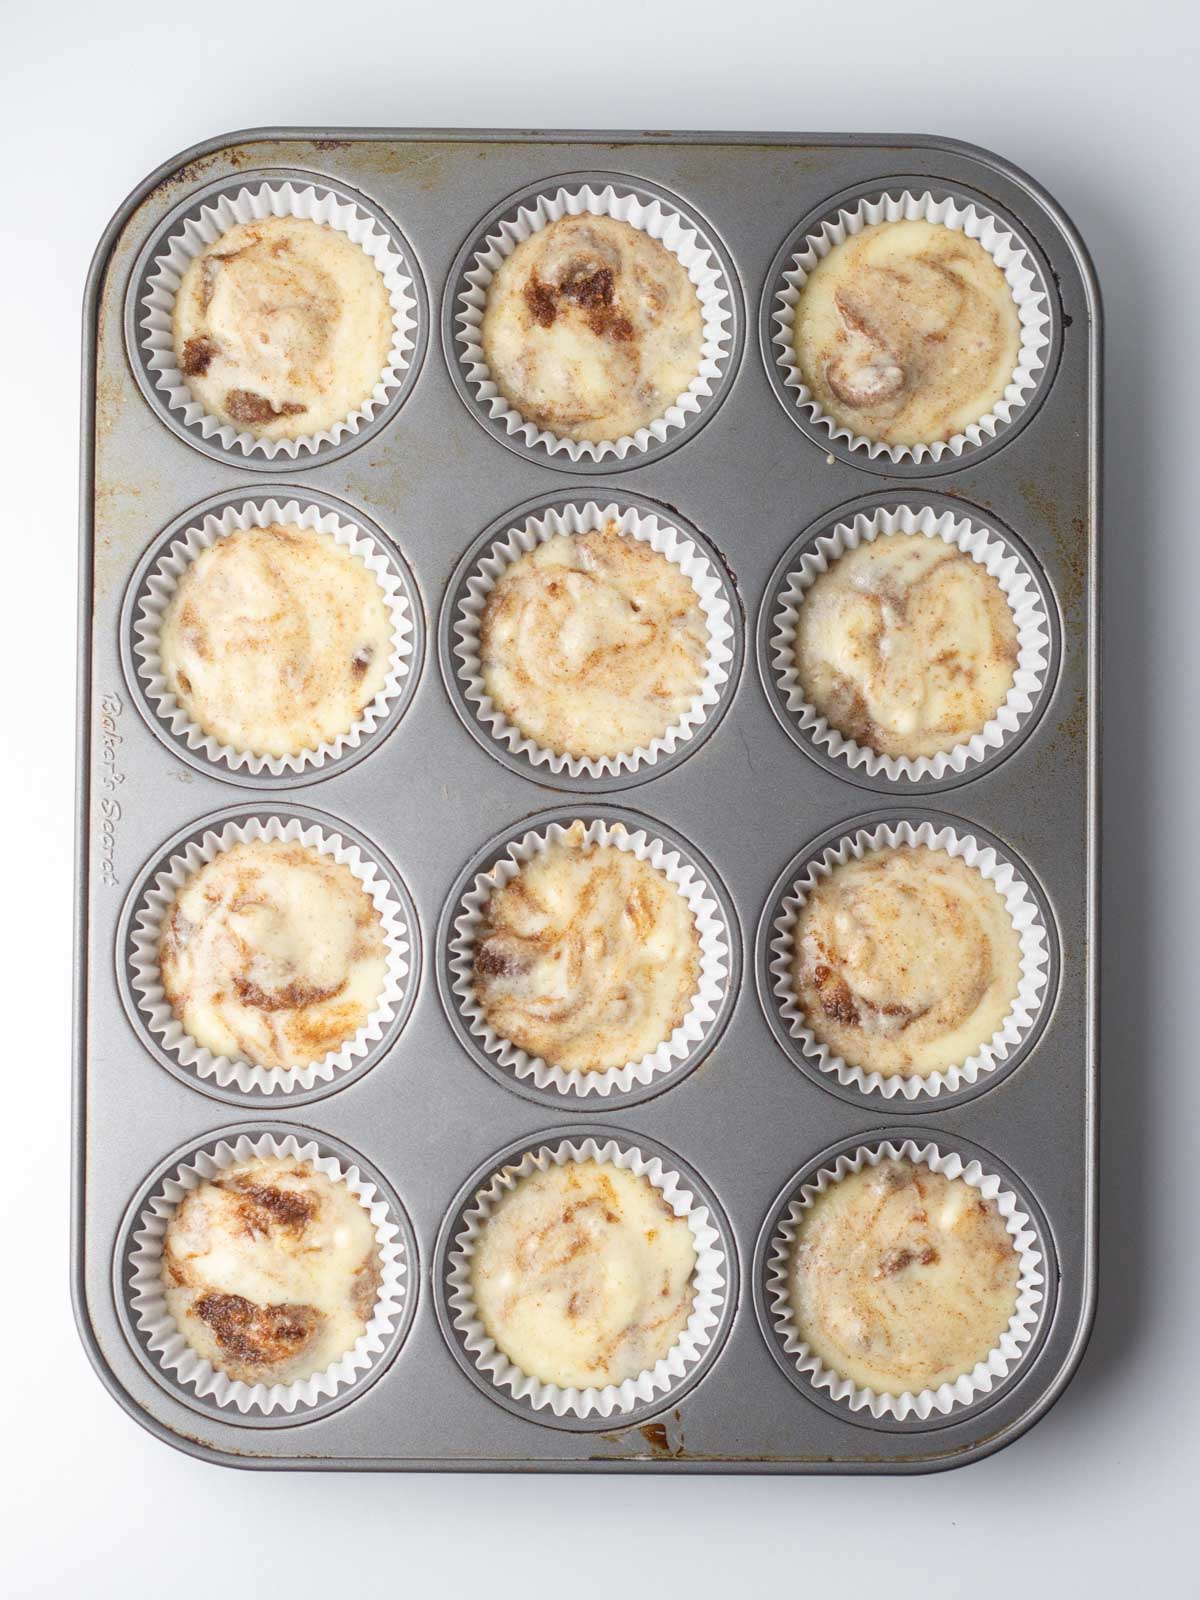 Cupcake batter in paper liners of muffin tin.